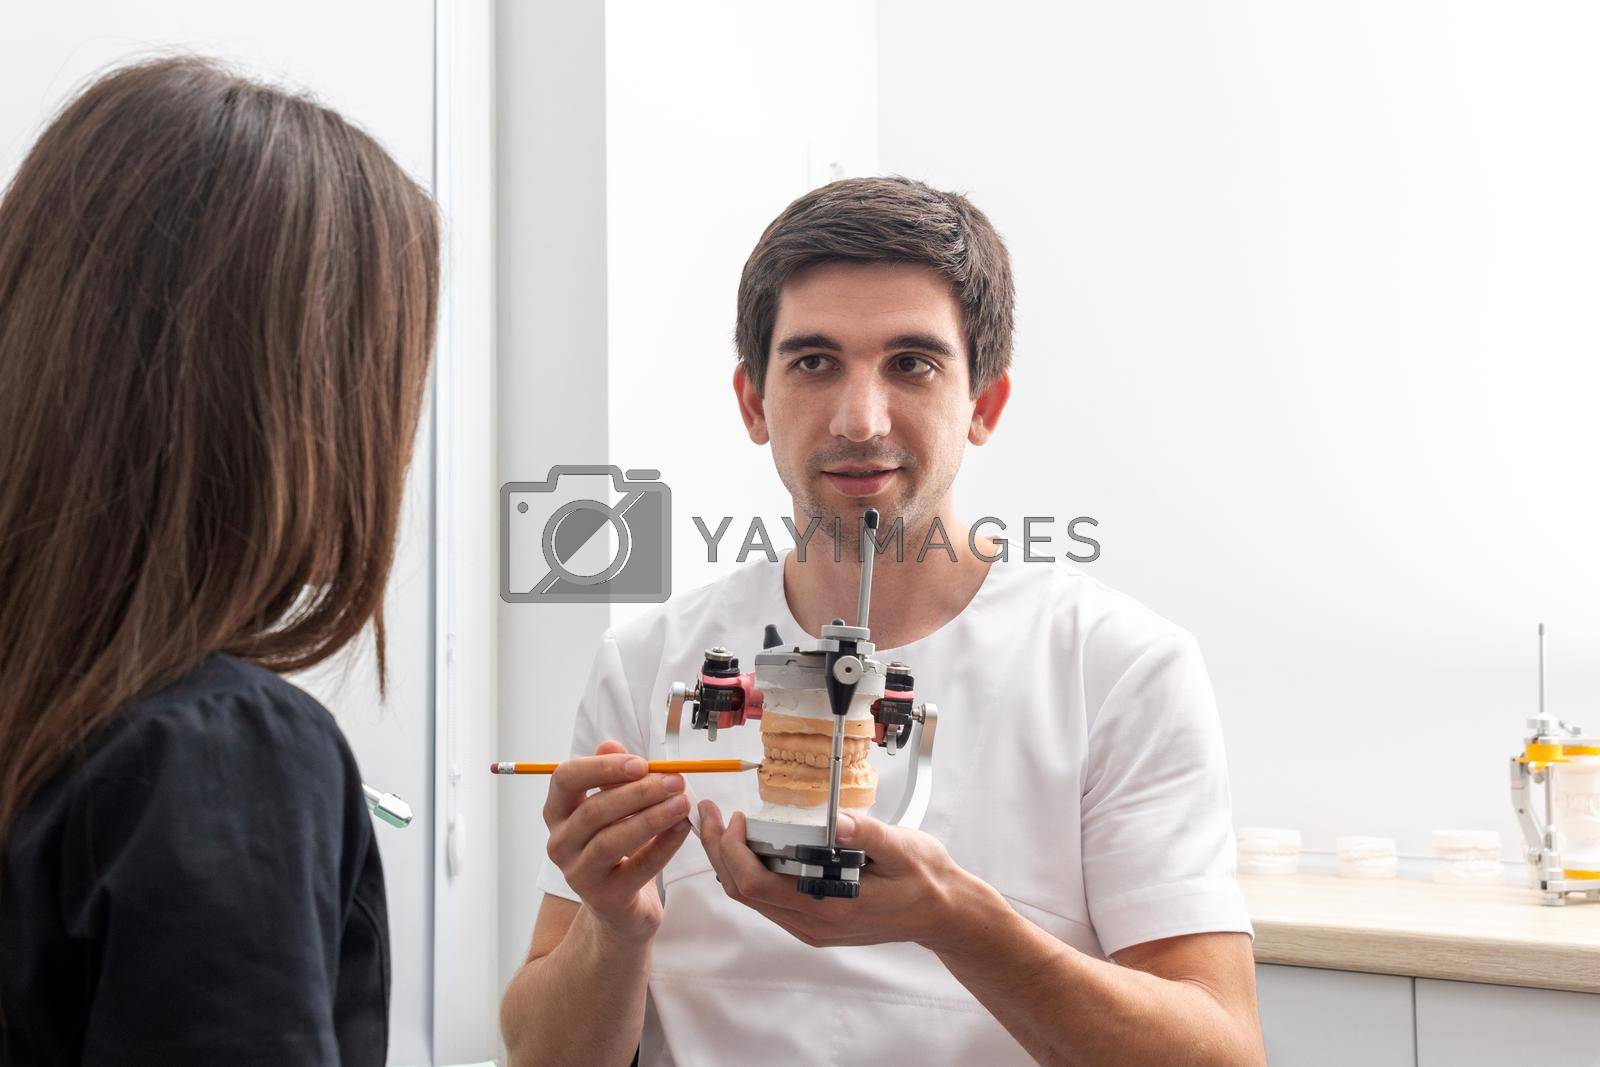 Dentist holding dental articulator with dental gypsum prosthesis model showing it to patient